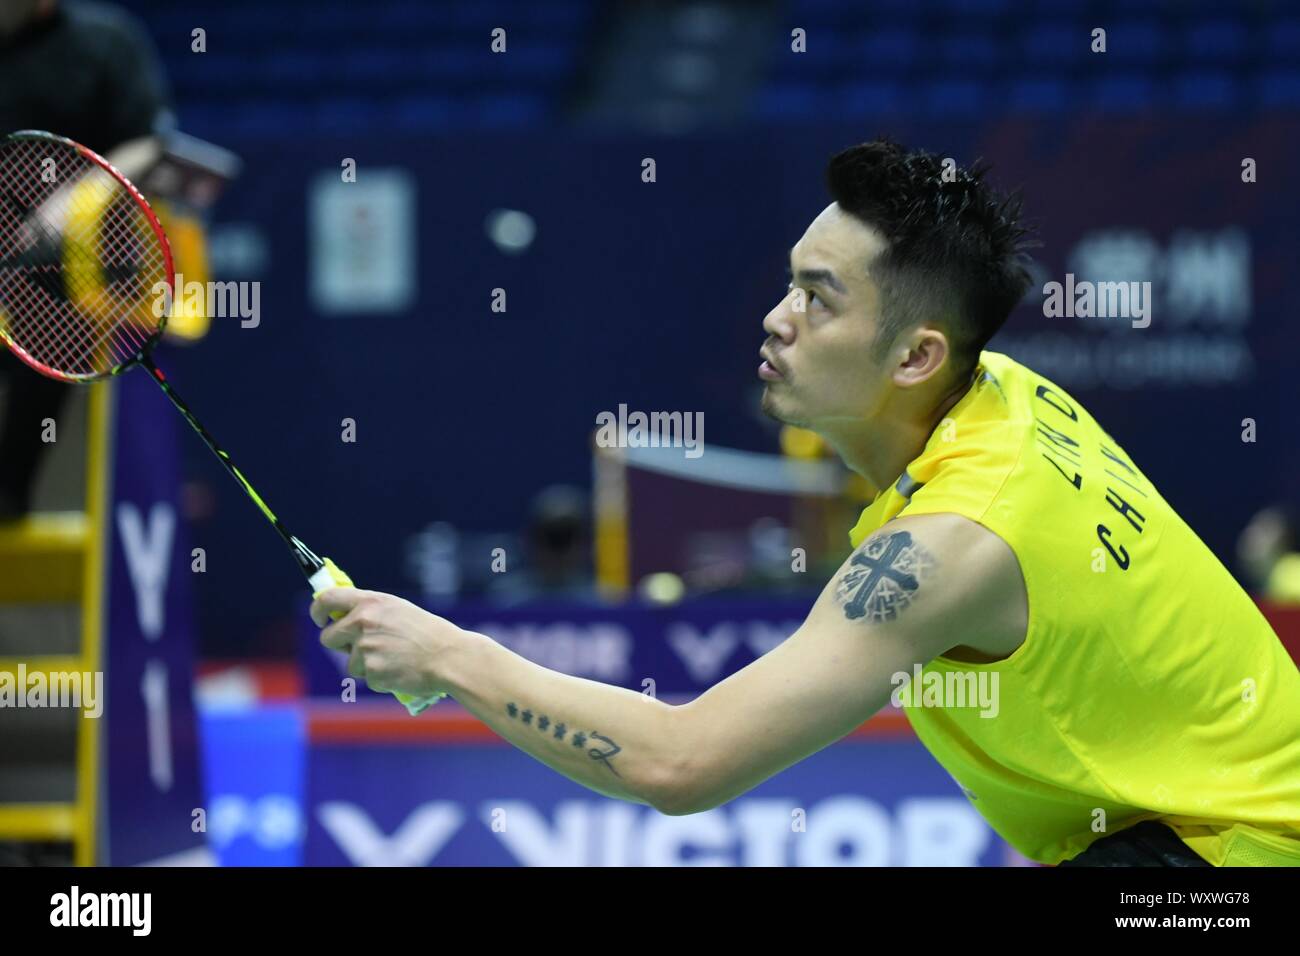 Chinese professional badminton player Lin Dan competes against Japanese  professional badminton player Kento Momota at the first round of men's  single of VICTOR China Open 2019, in Changzhou city, east China's Jiangsu